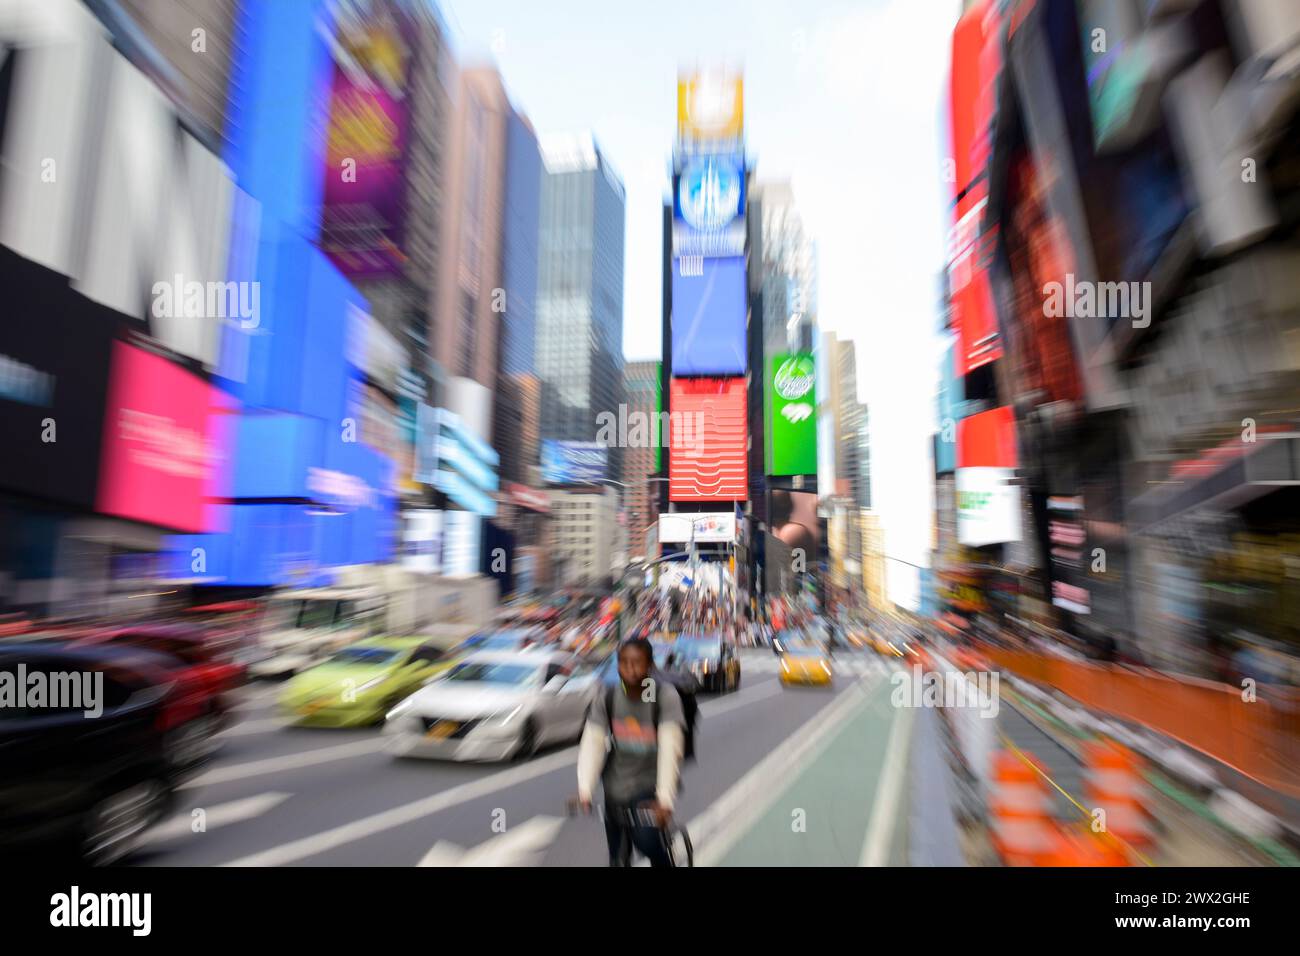 USA, New York City, Manhattan, Broadway and Times Square, bicycle, traffic and advertisement neon light billboards, image with blurred zoomed effect Stock Photo